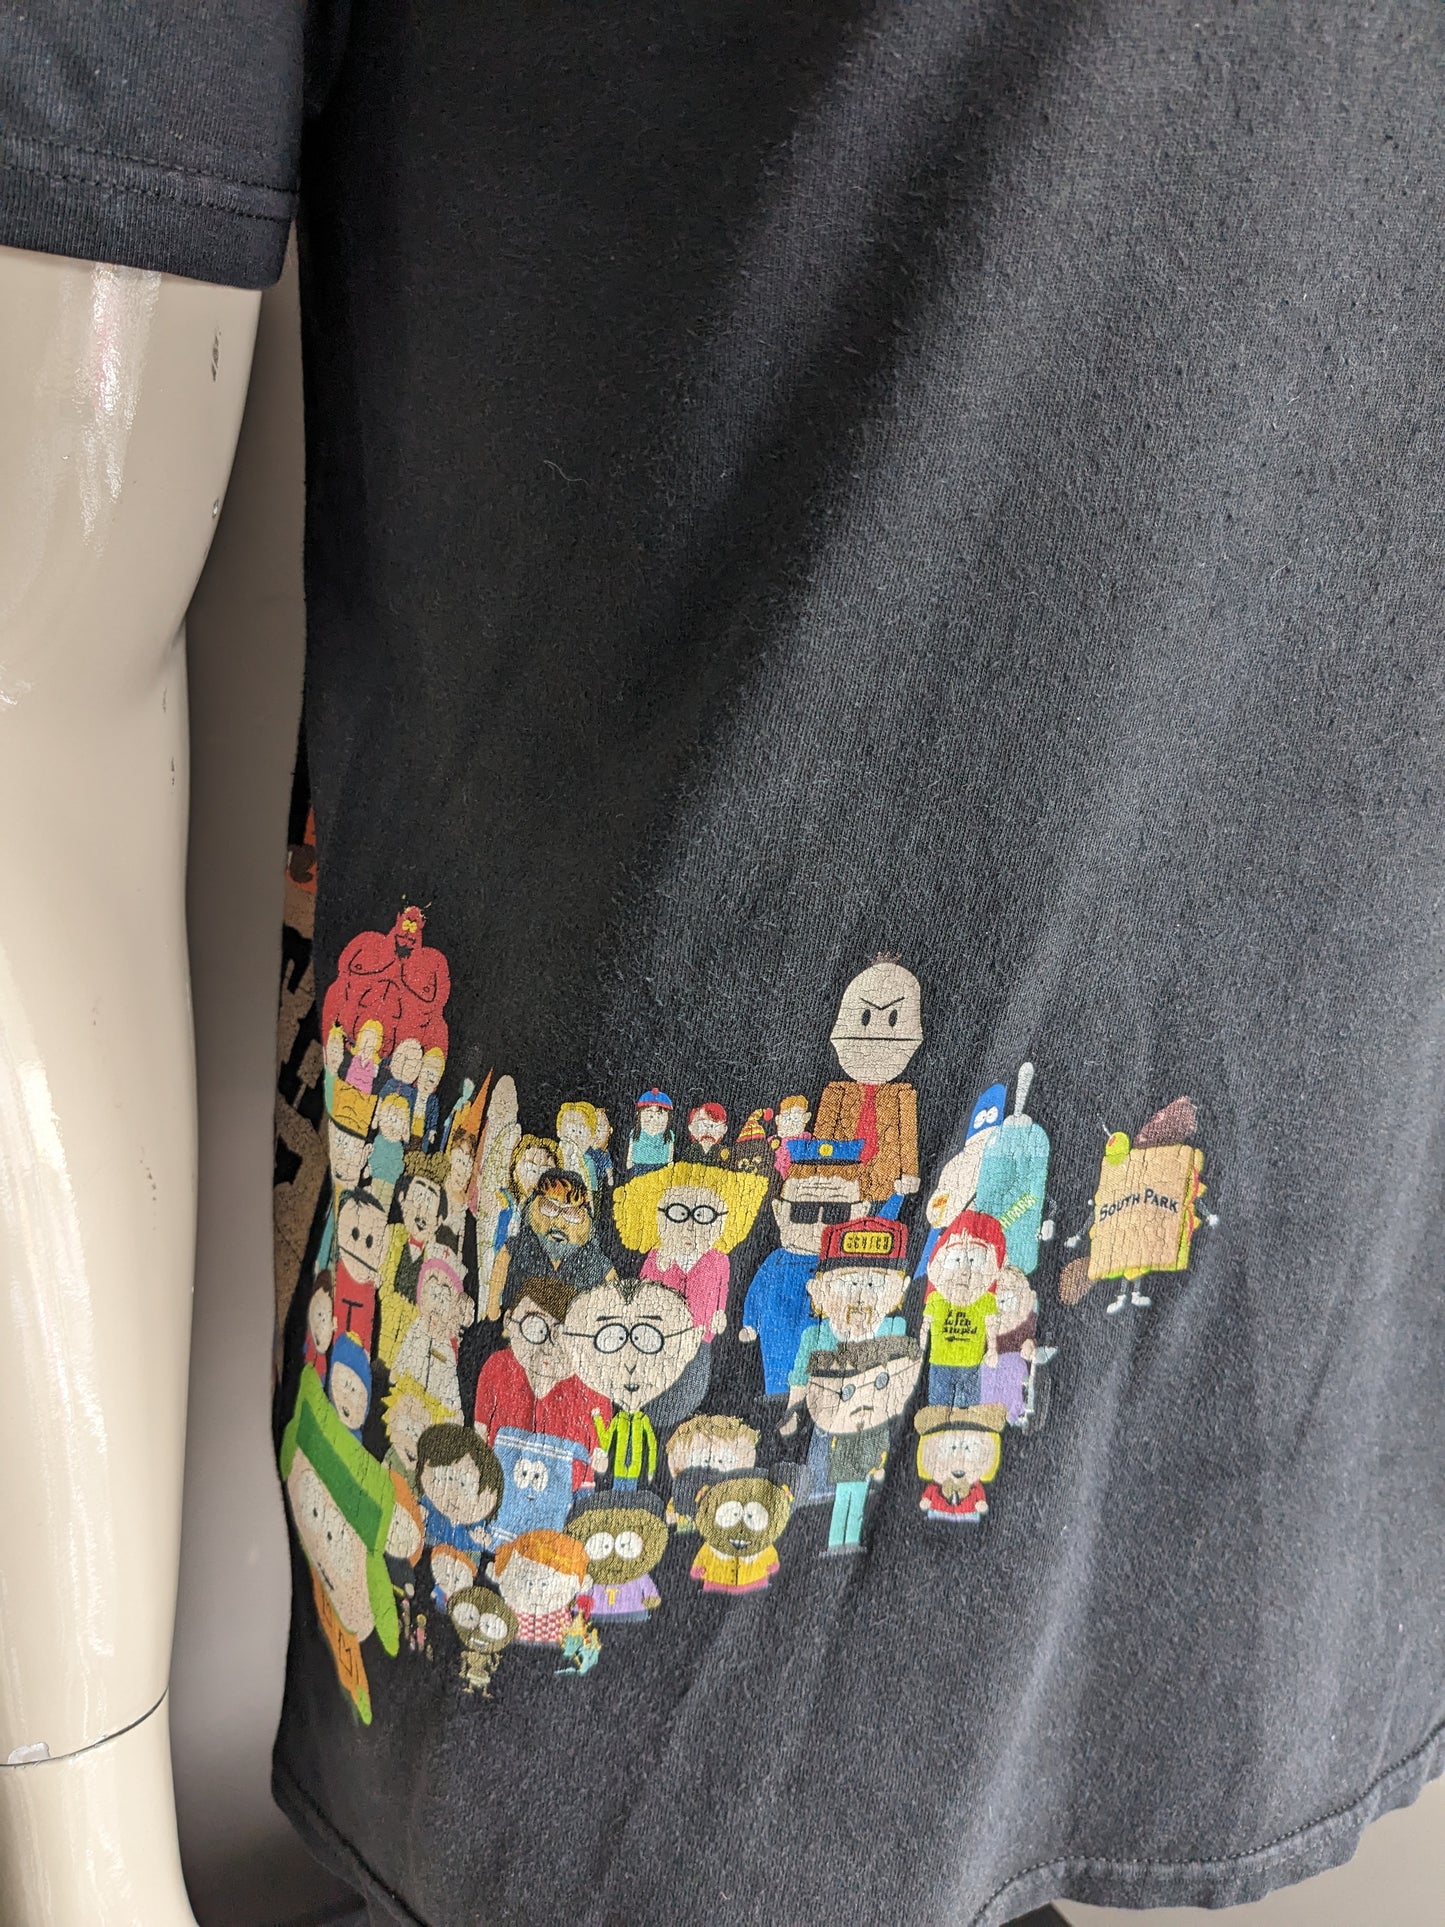 Huf South Park shirt. Black with colored print. Size M.